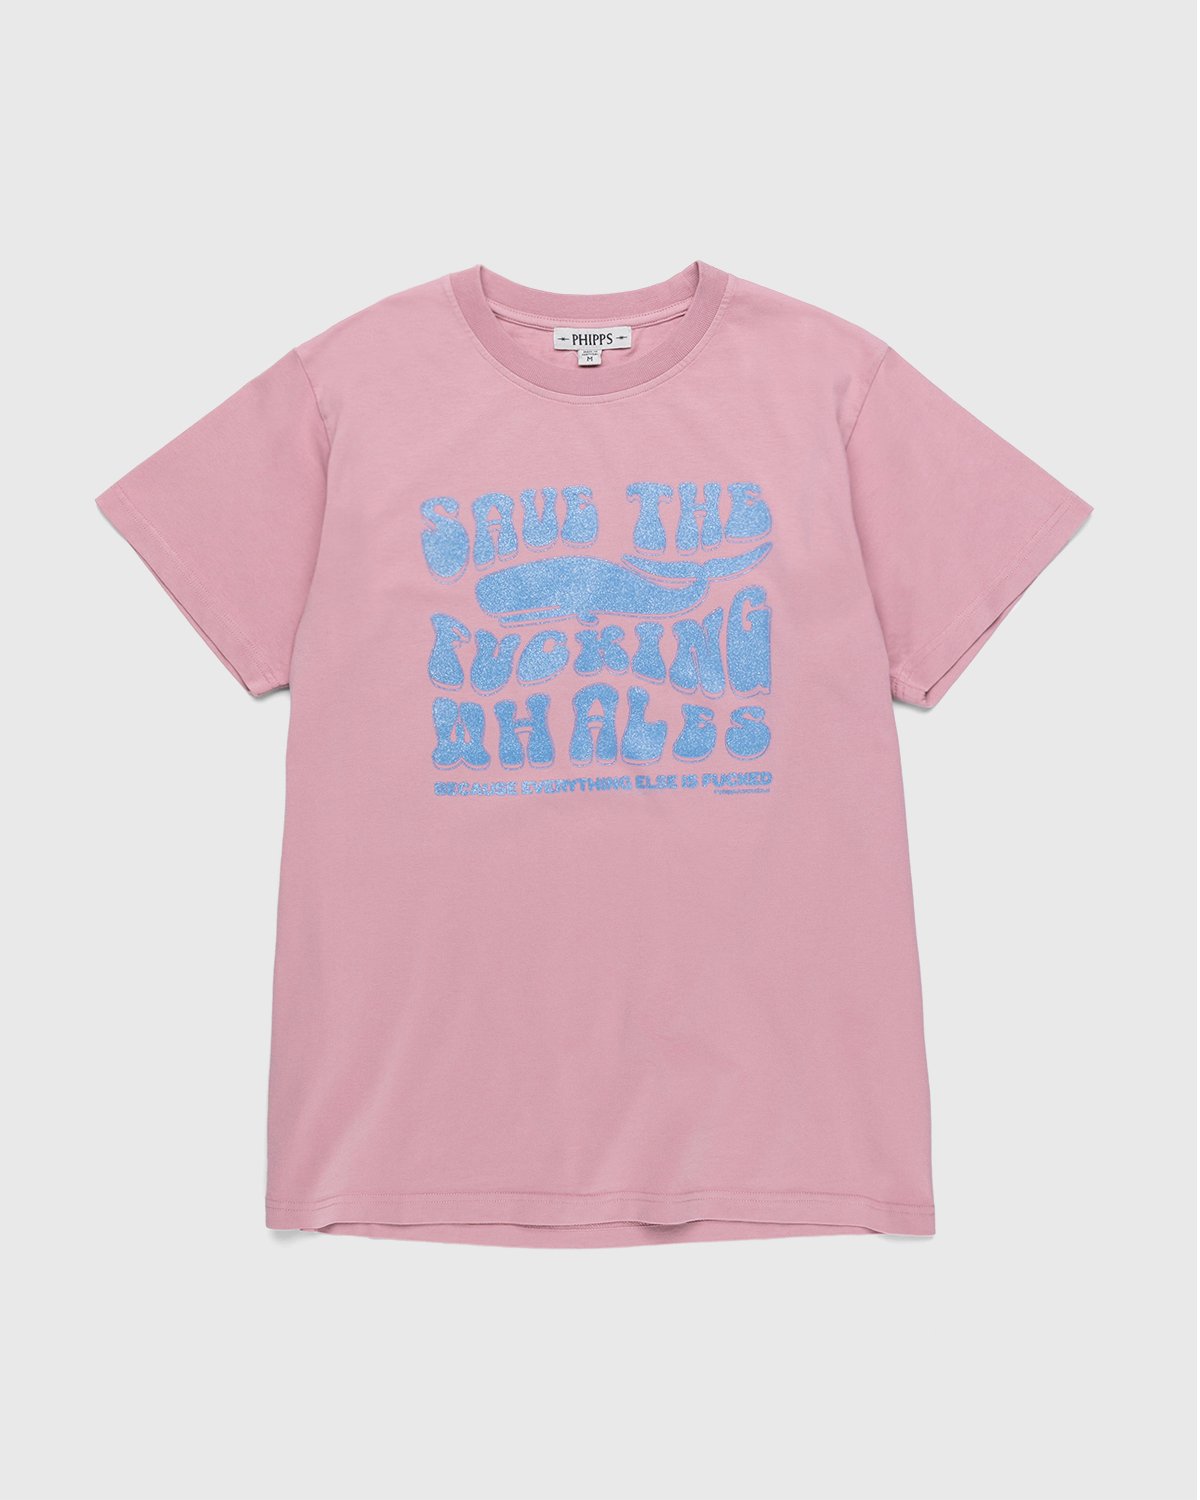 Phipps - Save The Fucking Whales T-Shirt Pink - Clothing - Pink - Image 1